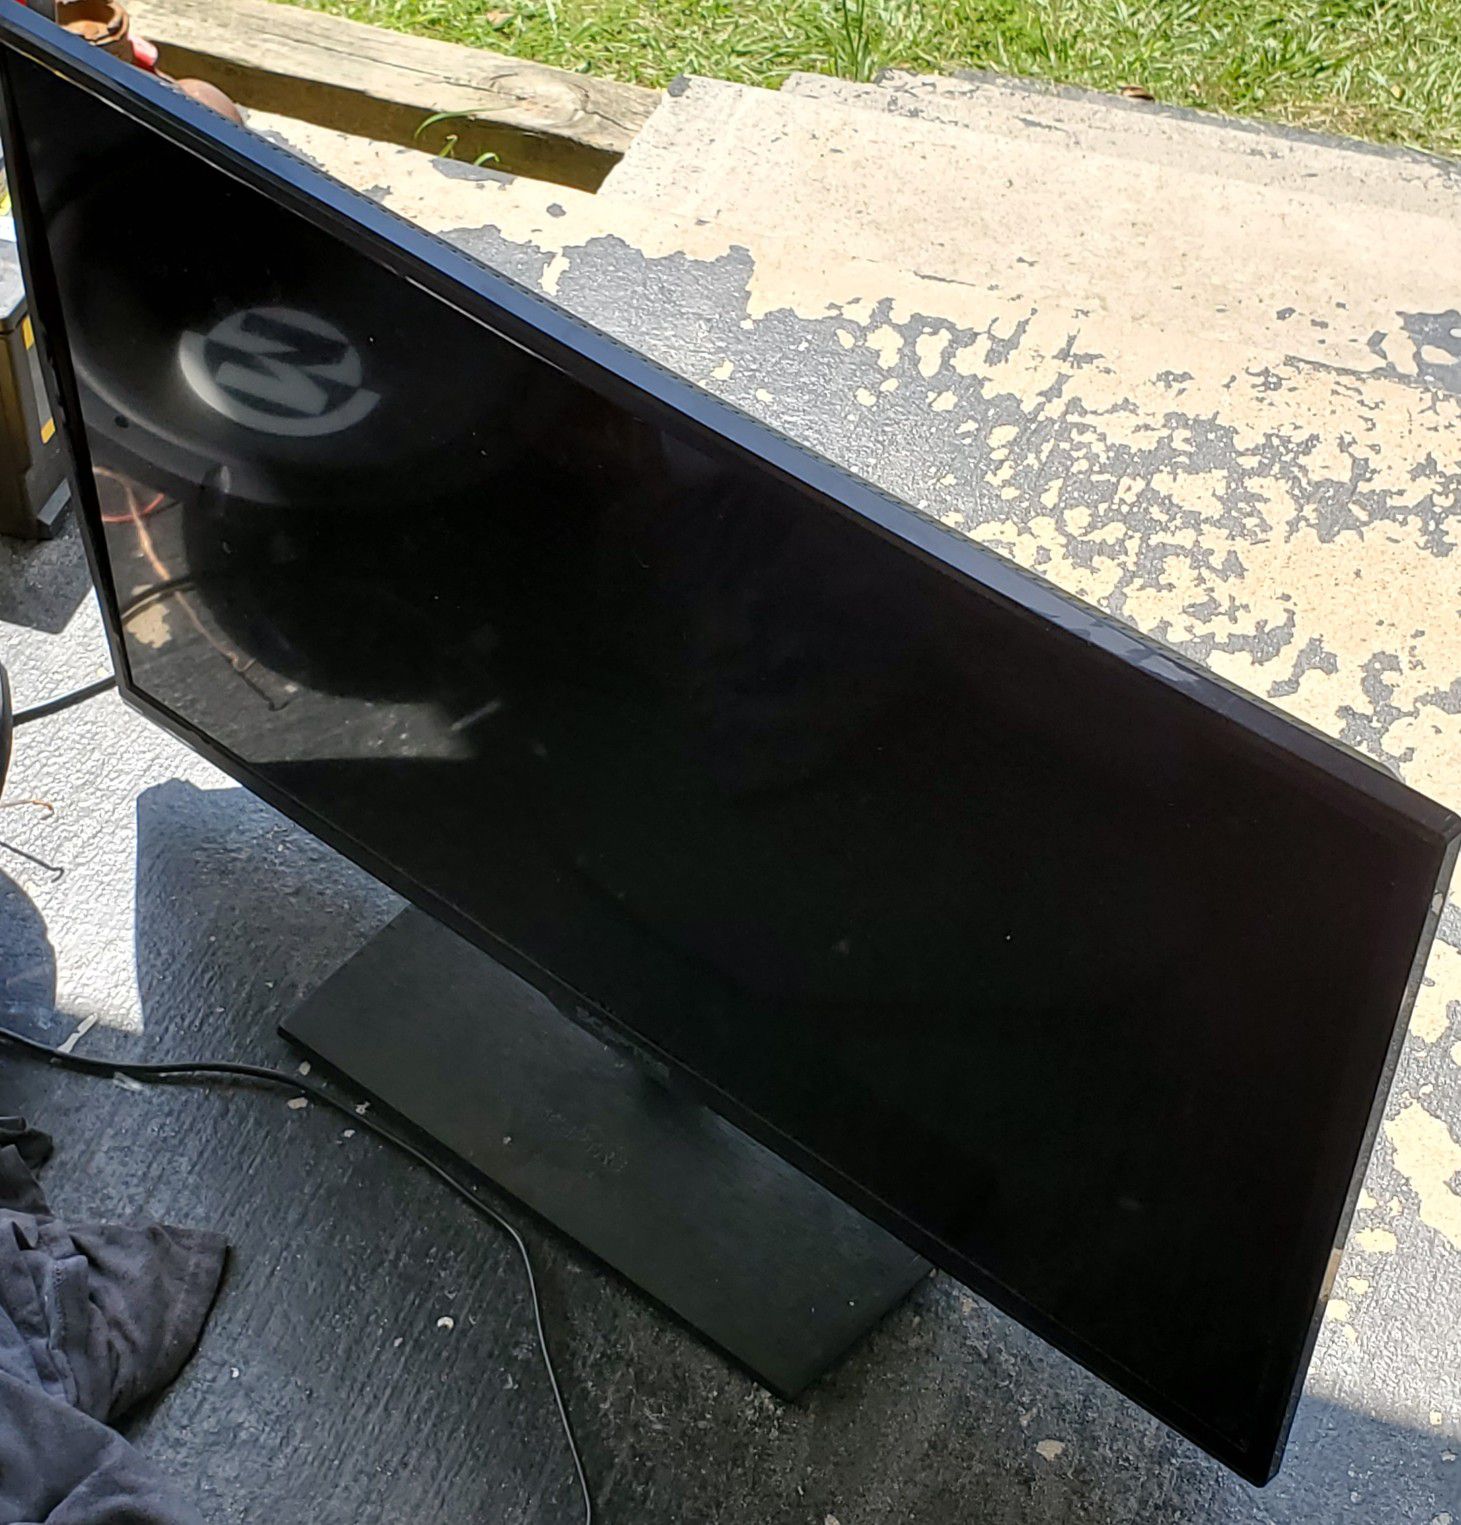 Two 34" TVs $75 each